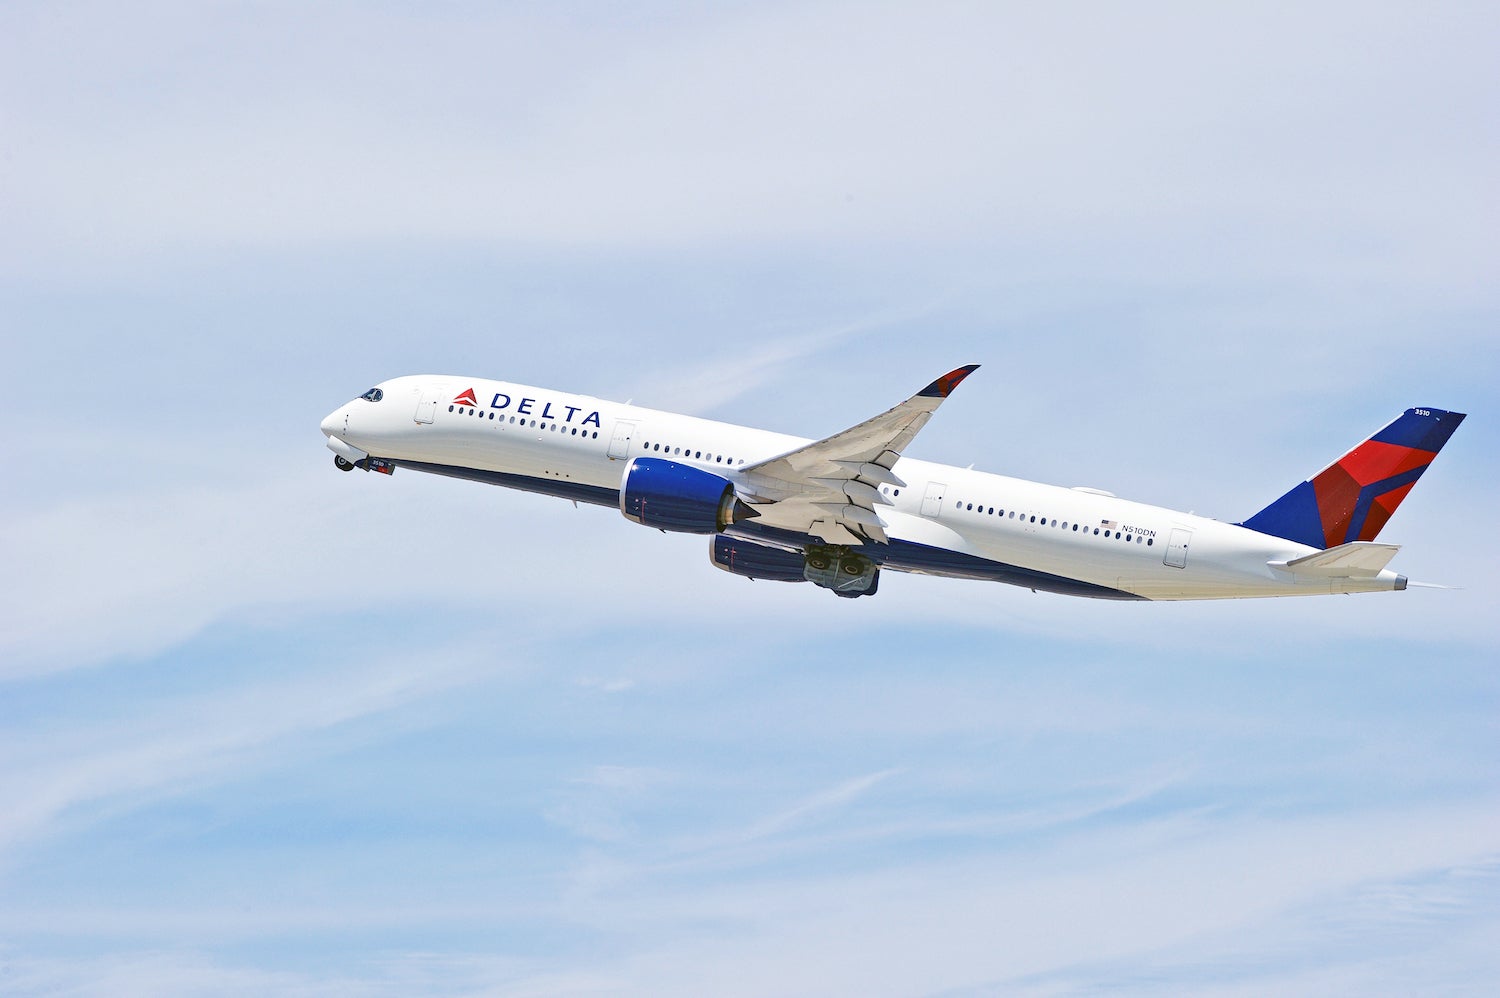 Delta Air Lines A350 Taking Off